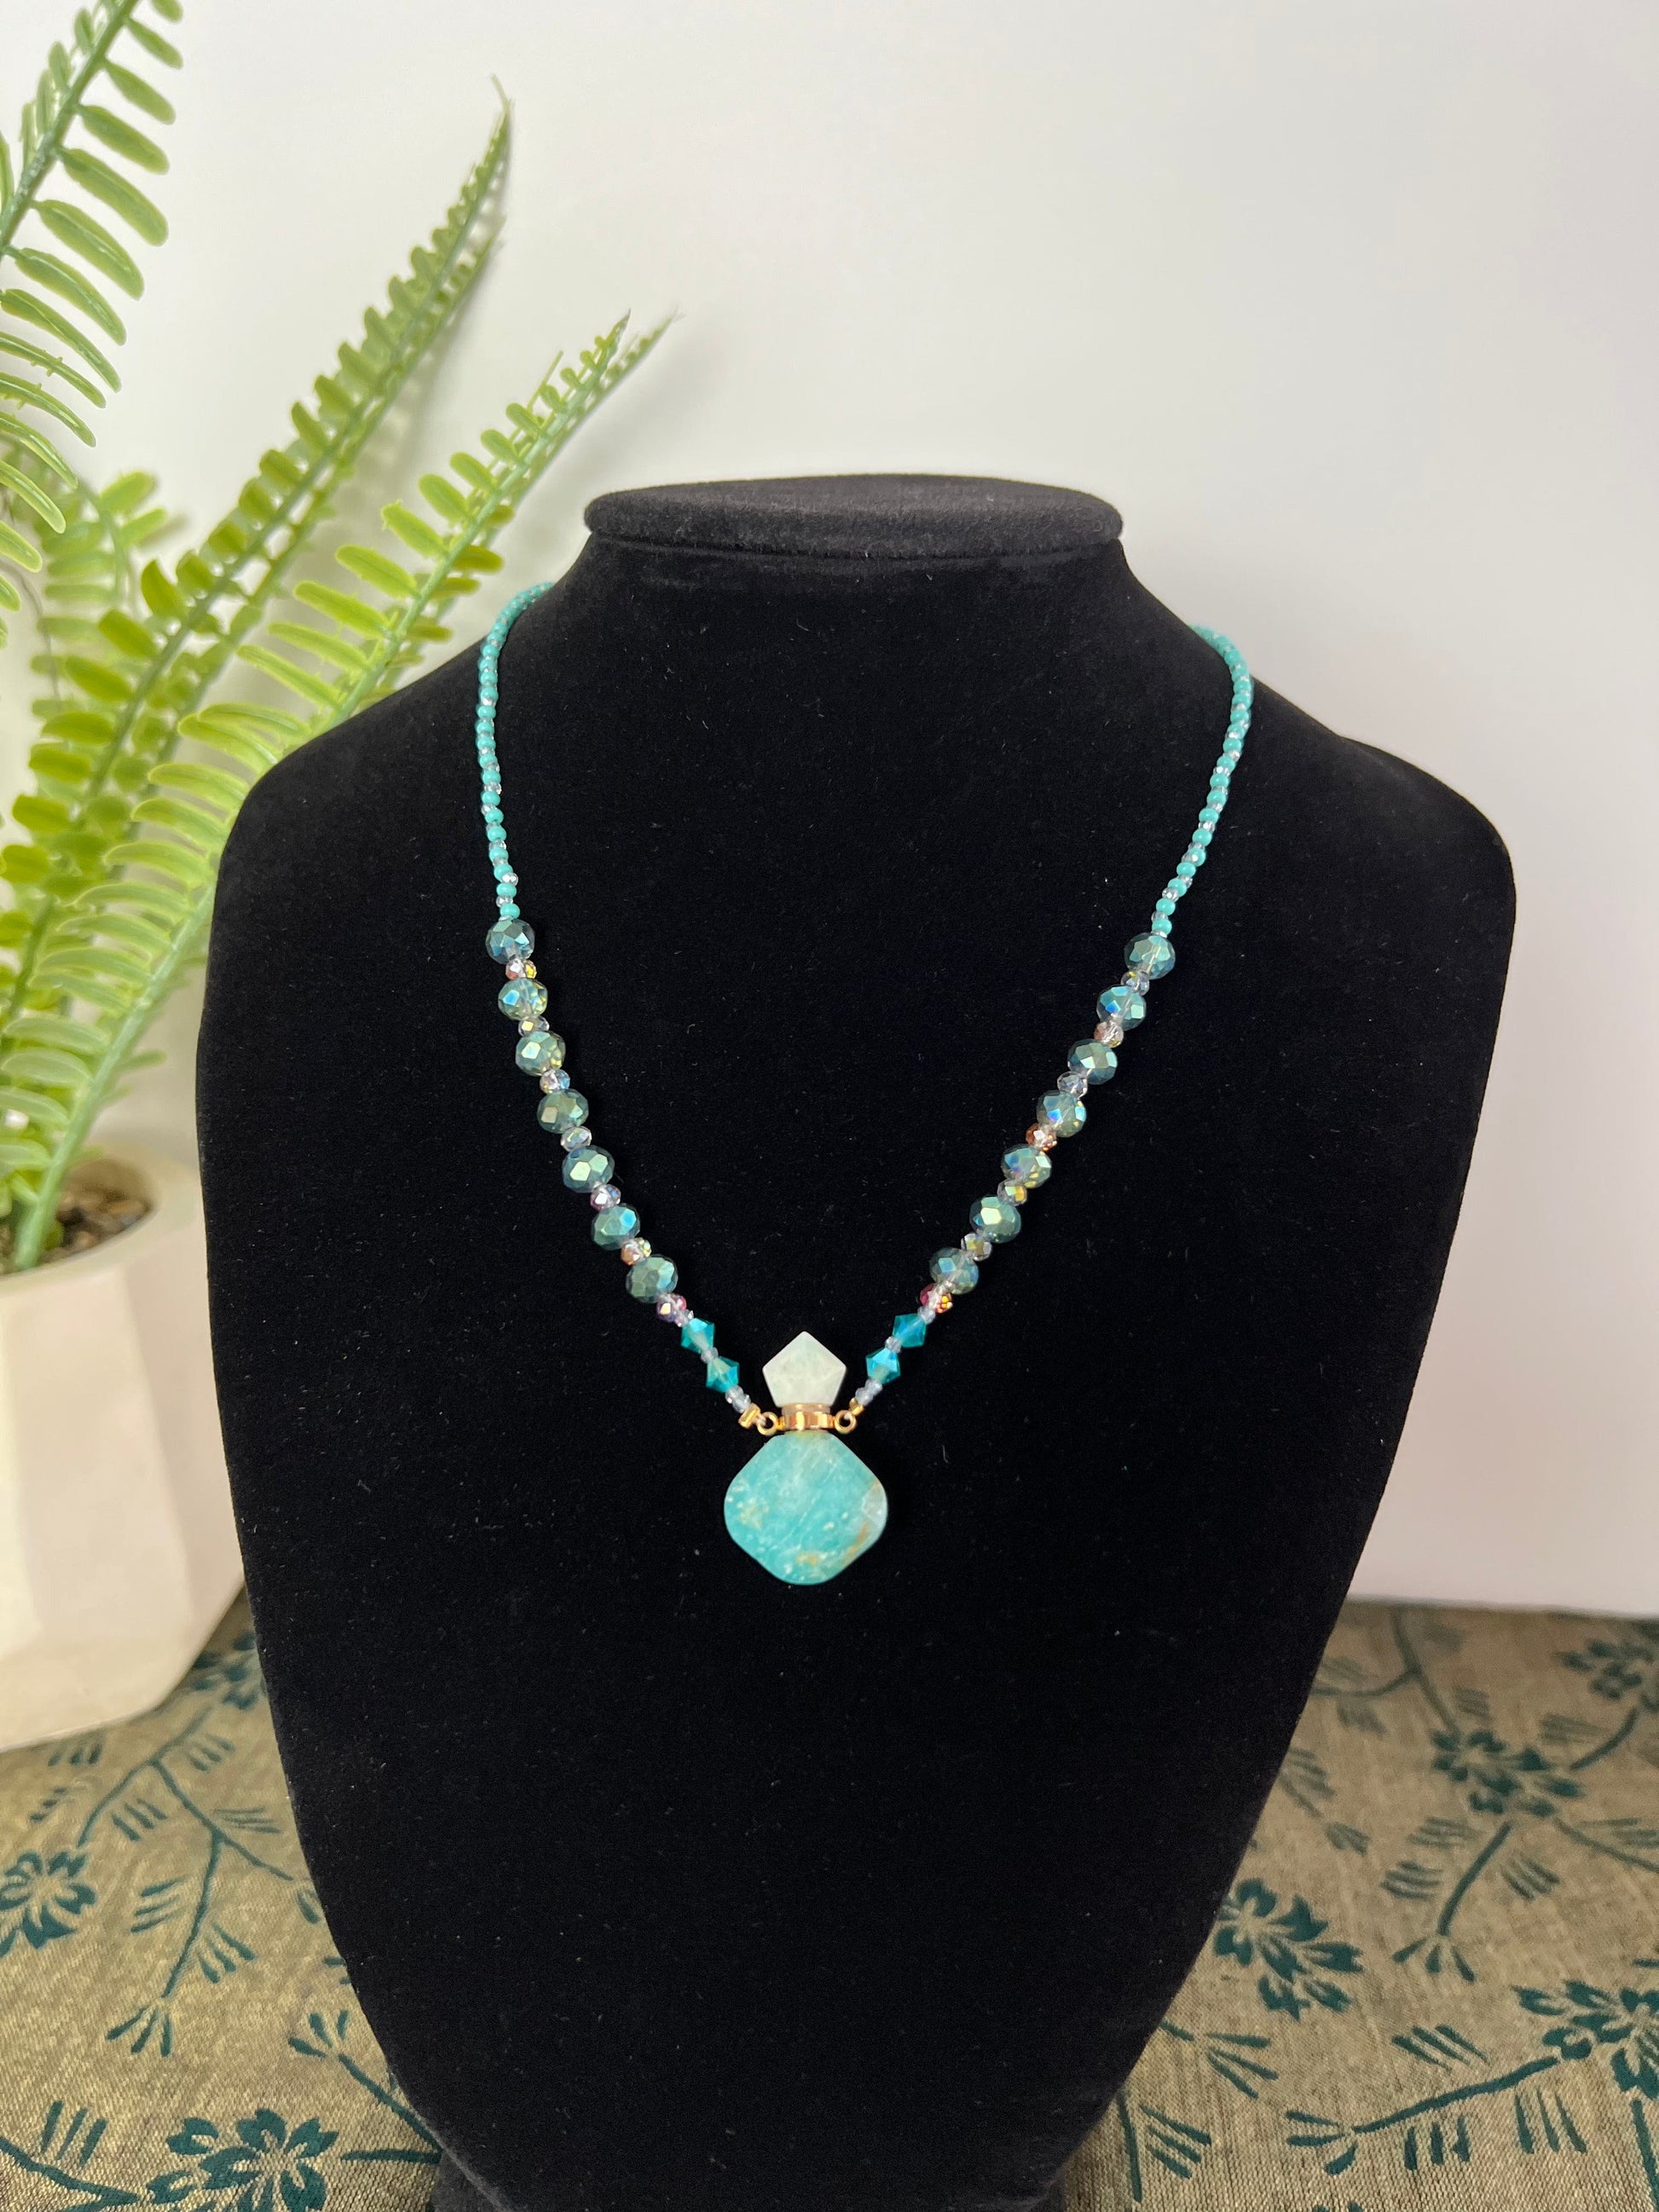 draft Necklaces Amazonite Crystal Vial Necklace